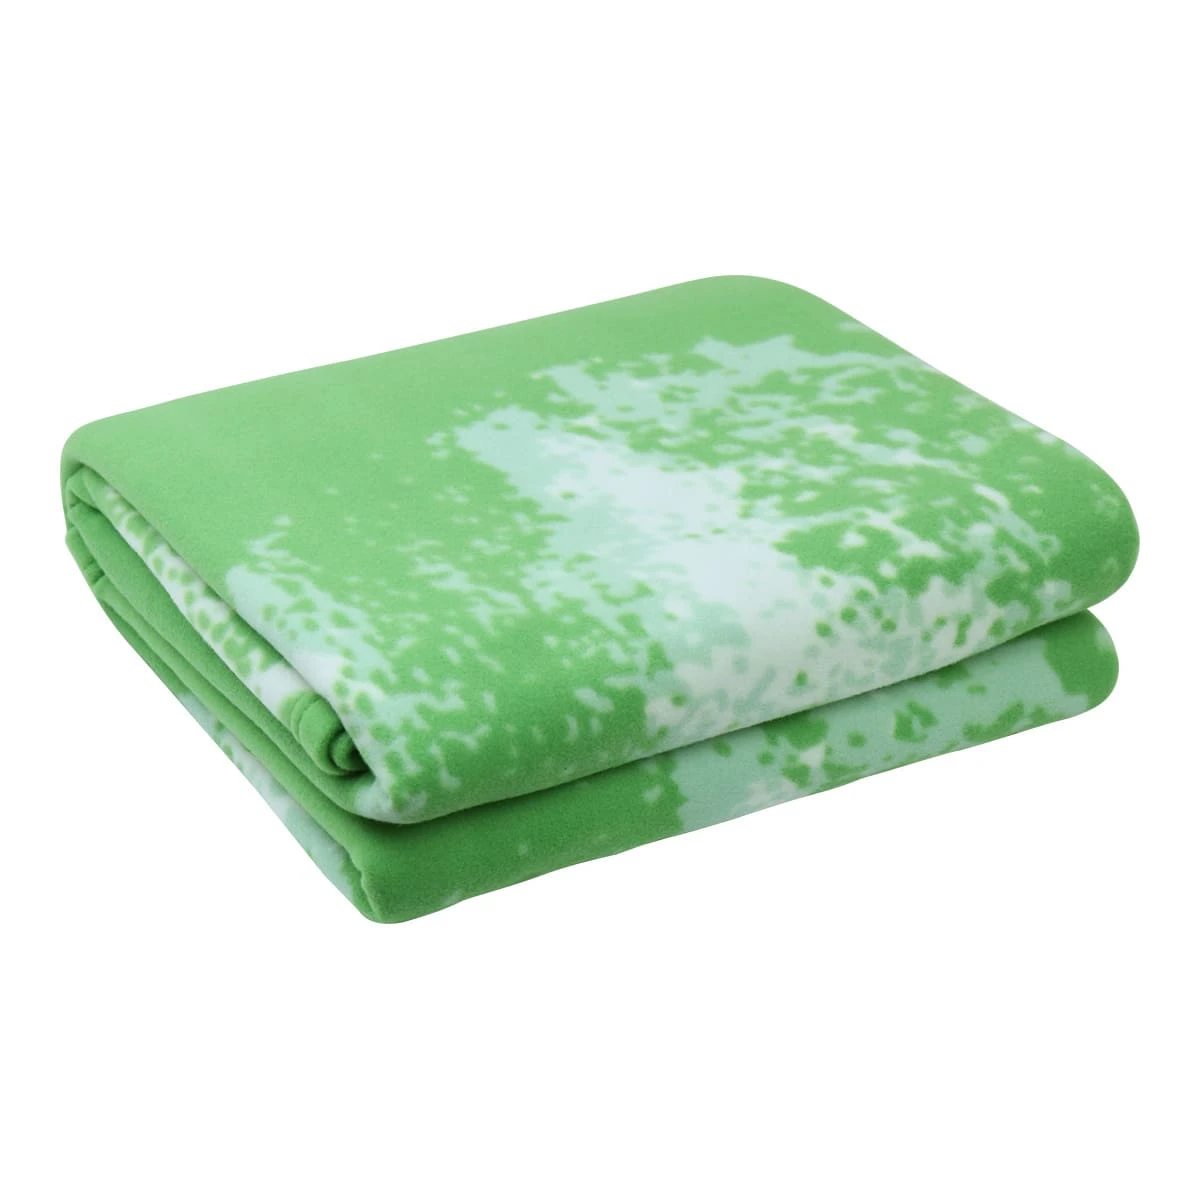 100% Recycled Polyester Bottles Printed Fleece Blanket - I Love Recycling (Green)